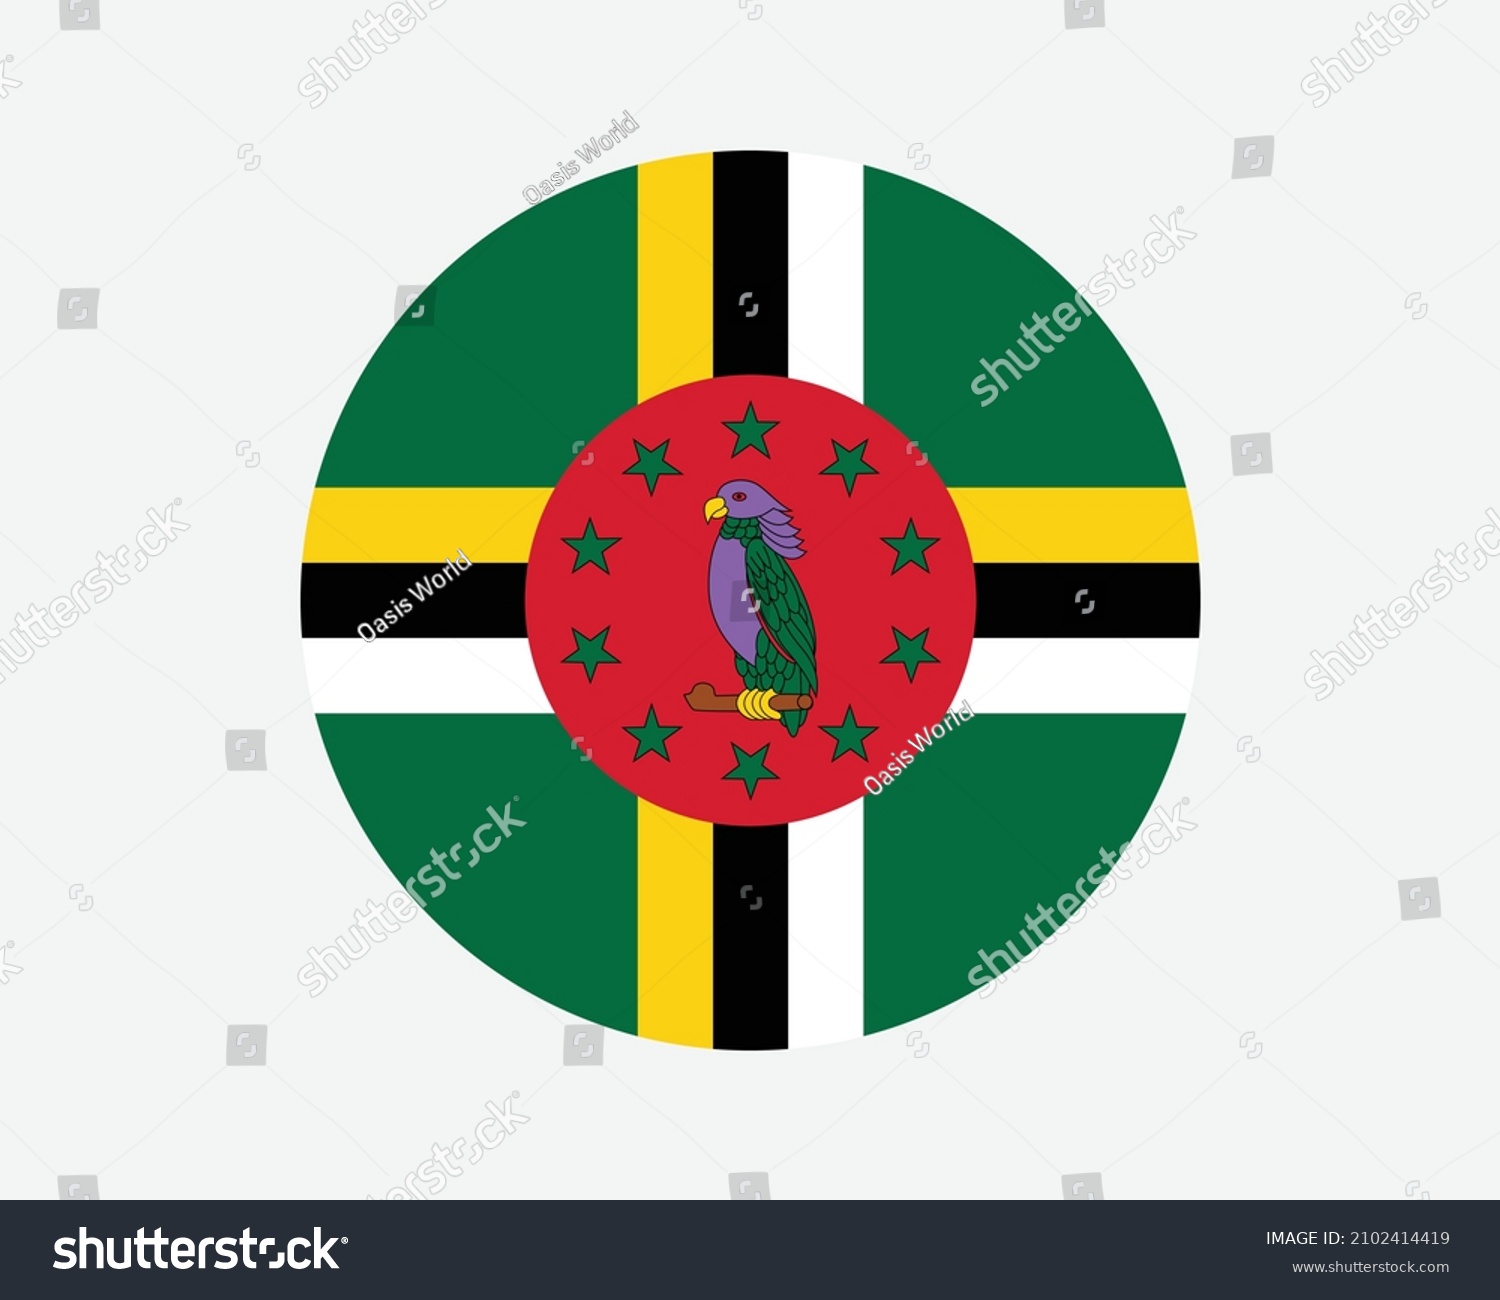 SVG of Dominica Round Country Flag. Circular Dominican National Flag. Commonwealth of Dominica Circle Shape Button Banner. EPS Vector Illustration. svg